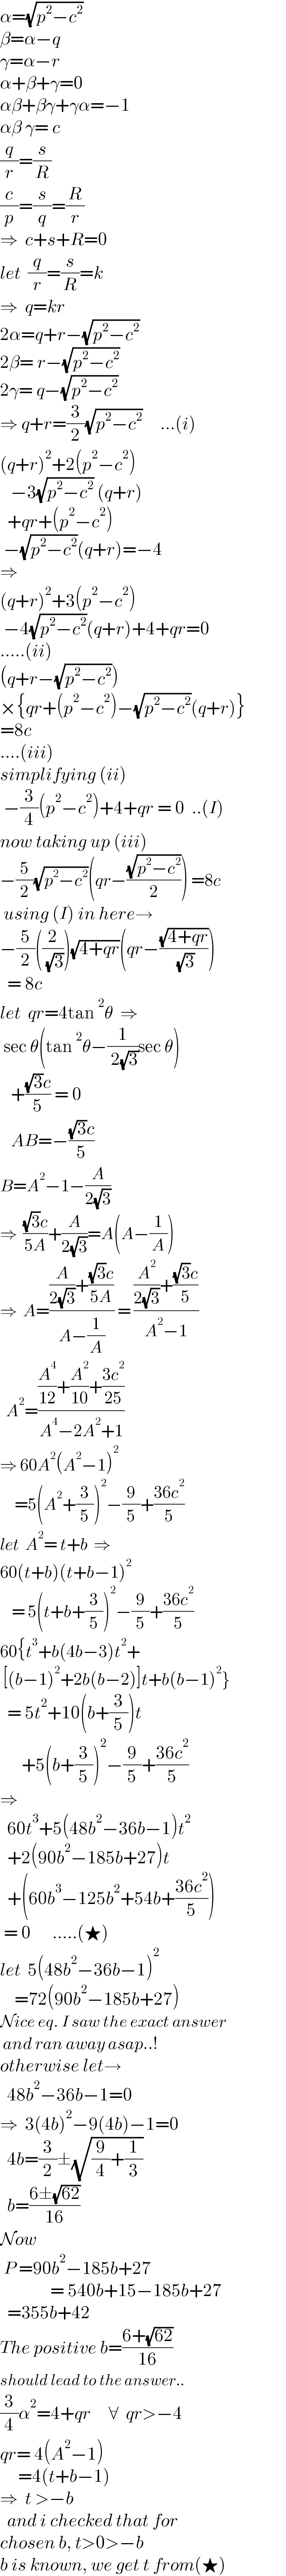 α=(√(p^2 −c^2 ))  β=α−q  γ=α−r  α+β+γ=0  αβ+βγ+γα=−1  αβ γ= c  (q/r)=(s/R)  (c/p)=(s/q)=(R/r)  ⇒  c+s+R=0  let  (q/r)=(s/R)=k  ⇒  q=kr  2α=q+r−(√(p^2 −c^2 ))  2β= r−(√(p^2 −c^2 ))  2γ= q−(√(p^2 −c^2 ))  ⇒ q+r=(3/2)(√(p^2 −c^2 ))     ...(i)  (q+r)^2 +2(p^2 −c^2 )     −3(√(p^2 −c^2 )) (q+r)    +qr+(p^2 −c^2 )   −(√(p^2 −c^2 ))(q+r)=−4  ⇒  (q+r)^2 +3(p^2 −c^2 )   −4(√(p^2 −c^2 ))(q+r)+4+qr=0  .....(ii)  (q+r−(√(p^2 −c^2 )))  ×{qr+(p^2 −c^2 )−(√(p^2 −c^2 ))(q+r)}  =8c  ....(iii)  simplifying (ii)   −(3/4)(p^2 −c^2 )+4+qr = 0  ..(I)  now taking up (iii)  −(5/2)(√(p^2 −c^2 ))(qr−((√(p^2 −c^2 ))/2)) =8c   using (I) in here→  −(5/2)((2/( (√3))))(√(4+qr))(qr−((√(4+qr))/( (√3))))    = 8c  let  qr=4tan^2 θ  ⇒   sec θ(tan^2 θ−(1/( 2(√3)))sec θ)     +(((√3)c)/5) = 0     AB=−(((√3)c)/5)  B=A^2 −1−(A/(2(√3)))  ⇒  (((√3)c)/(5A))+(A/(2(√3)))=A(A−(1/A))  ⇒  A=(((A/(2(√3)))+(((√3)c)/(5A)))/(A−(1/A))) = (((A^2 /(2(√3)))+(((√3)c)/5))/(A^2 −1))    A^2 =(((A^4 /(12))+(A^2 /(10))+((3c^2 )/(25)))/(A^4 −2A^2 +1))  ⇒ 60A^2 (A^2 −1)^2        =5(A^2 +(3/5))^2 −(9/5)+((36c^2 )/5)  let  A^2 = t+b  ⇒  60(t+b)(t+b−1)^2       = 5(t+b+(3/5))^2 −(9/5)+((36c^2 )/5)  60{t^3 +b(4b−3)t^2 +   [(b−1)^2 +2b(b−2)]t+b(b−1)^2 }    = 5t^2 +10(b+(3/5))t        +5(b+(3/5))^2 −(9/5)+((36c^2 )/5)  ⇒    60t^3 +5(48b^2 −36b−1)t^2     +2(90b^2 −185b+27)t    +(60b^3 −125b^2 +54b+((36c^2 )/5))   = 0      .....(★)  let  5(48b^2 −36b−1)^2       =72(90b^2 −185b+27)  Nice eq. I saw the exact answer   and ran away asap..!  otherwise let→    48b^2 −36b−1=0  ⇒  3(4b)^2 −9(4b)−1=0    4b=(3/2)±(√((9/4)+(1/3)))    b=((6±(√(62)))/(16))  Now   P =90b^2 −185b+27                = 540b+15−185b+27    =355b+42  The positive b=((6+(√(62)))/(16))  should lead to the answer..  (3/4)α^2 =4+qr     ∀  qr>−4  qr= 4(A^2 −1)       =4(t+b−1)  ⇒  t >−b        and i checked that for  chosen b, t>0>−b  b is known, we get t from(★)  